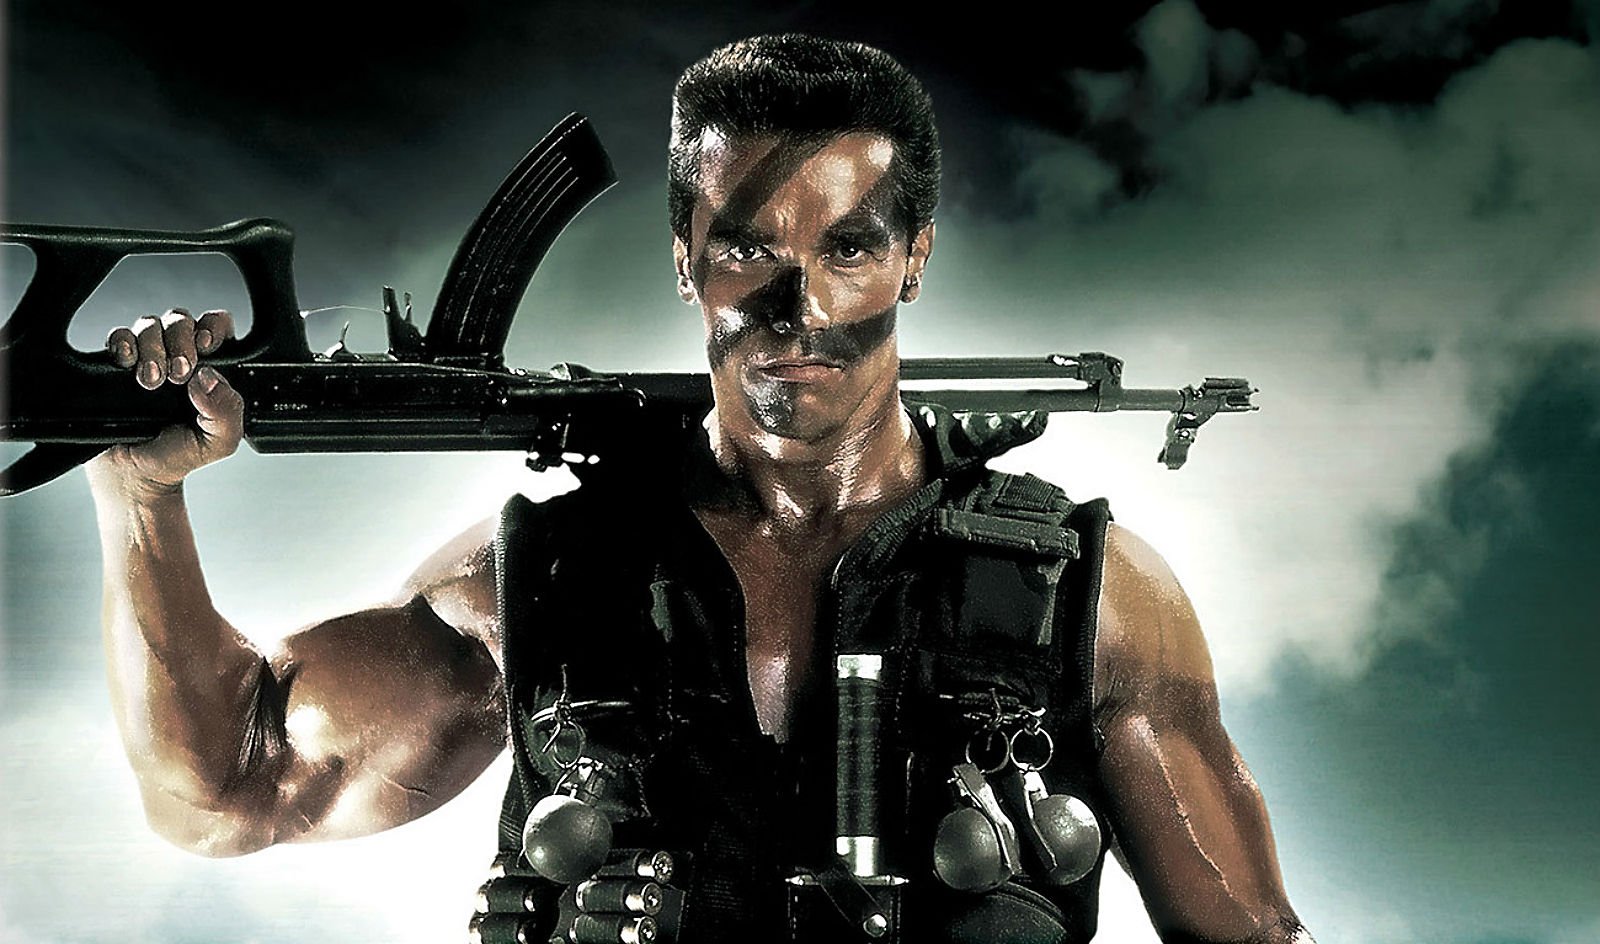 commando-movie-action-fighting-military-arnold-schwarzenegger-soldier-special-forces